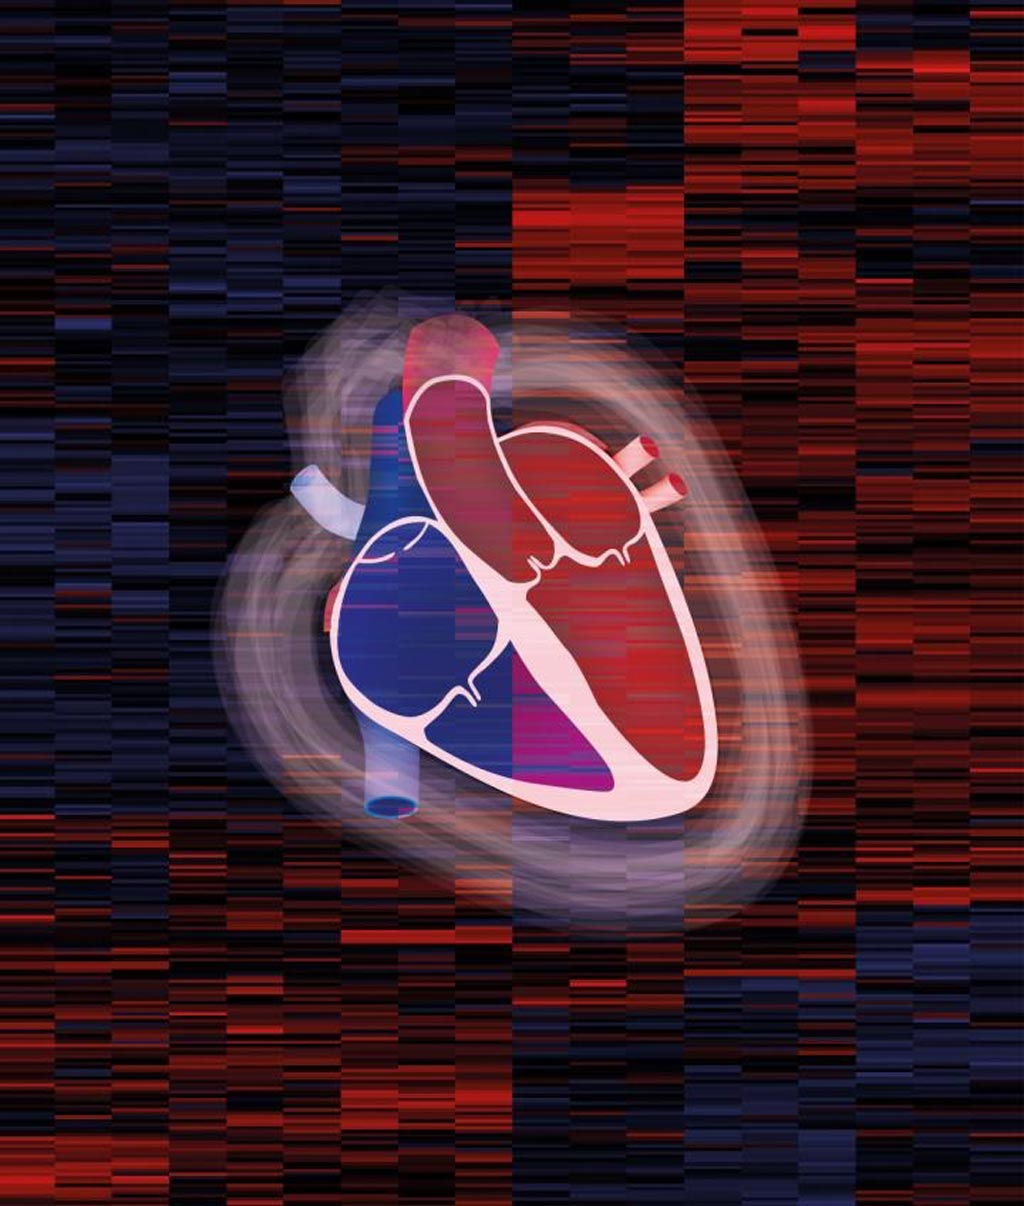 Image: Foreground: Drawing of a cardiac muscle. Background: excerpt from a heart map, an overview of the proteins analyzed for the proteomic map (Photo courtesy of Doll, Kraue, Menzfield, Max Planck Institute of Biochemistry).